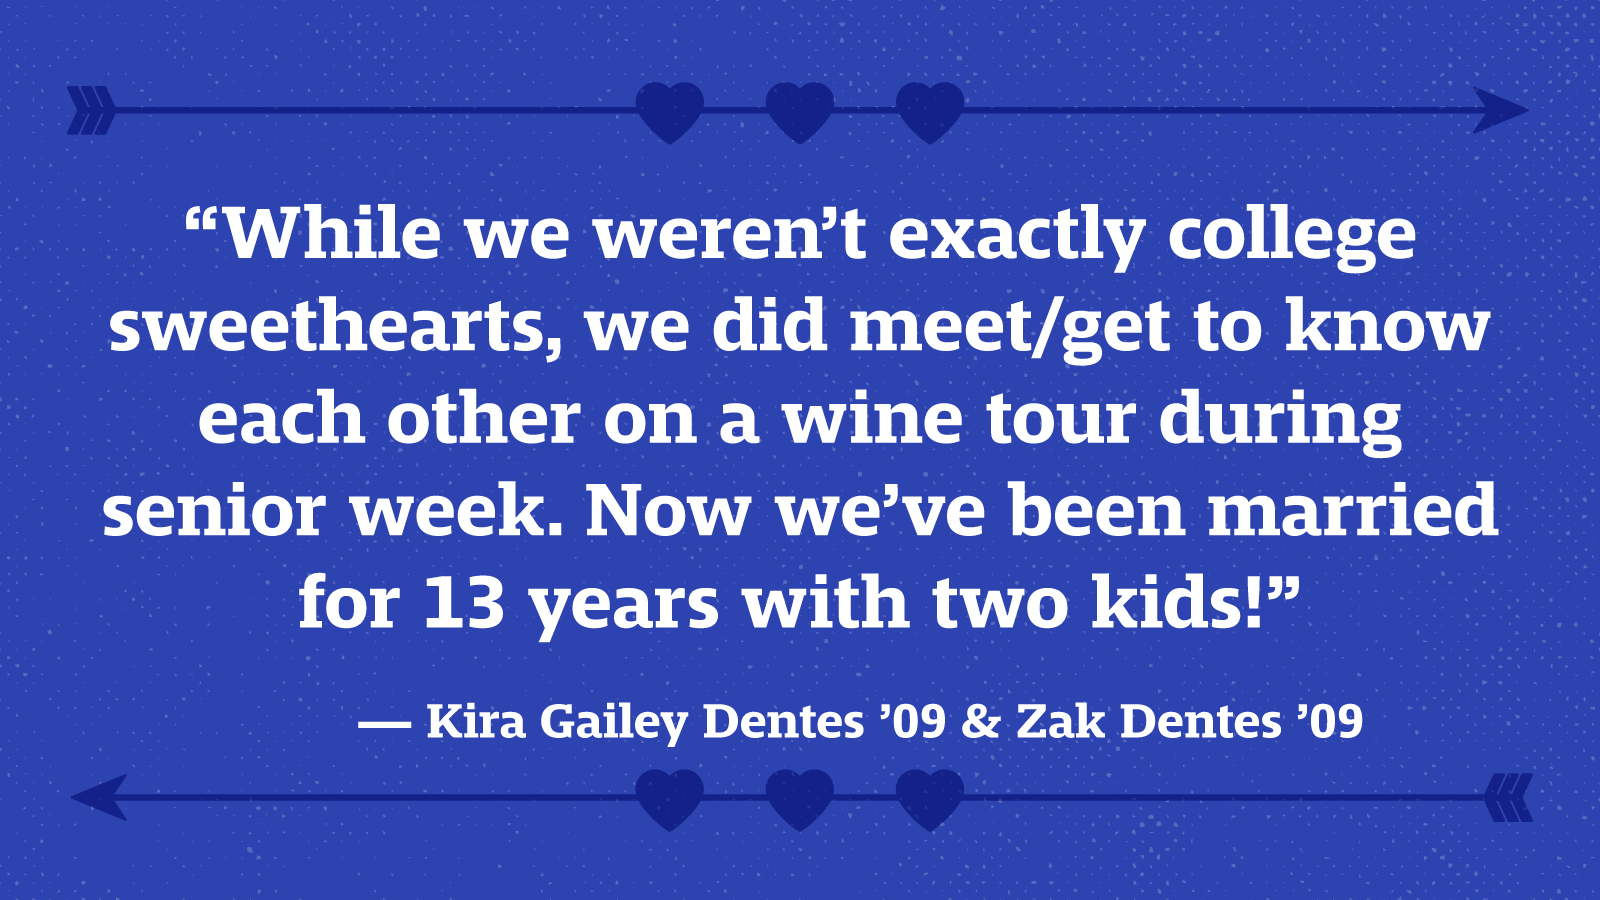 “While we weren’t exactly college sweethearts, we did meet/get to know each other on a wine tour during senior week. Now we’ve been married for 13 years with two kids!” — Kira Gailey Dentes ’09 & Zak Dentes ’09